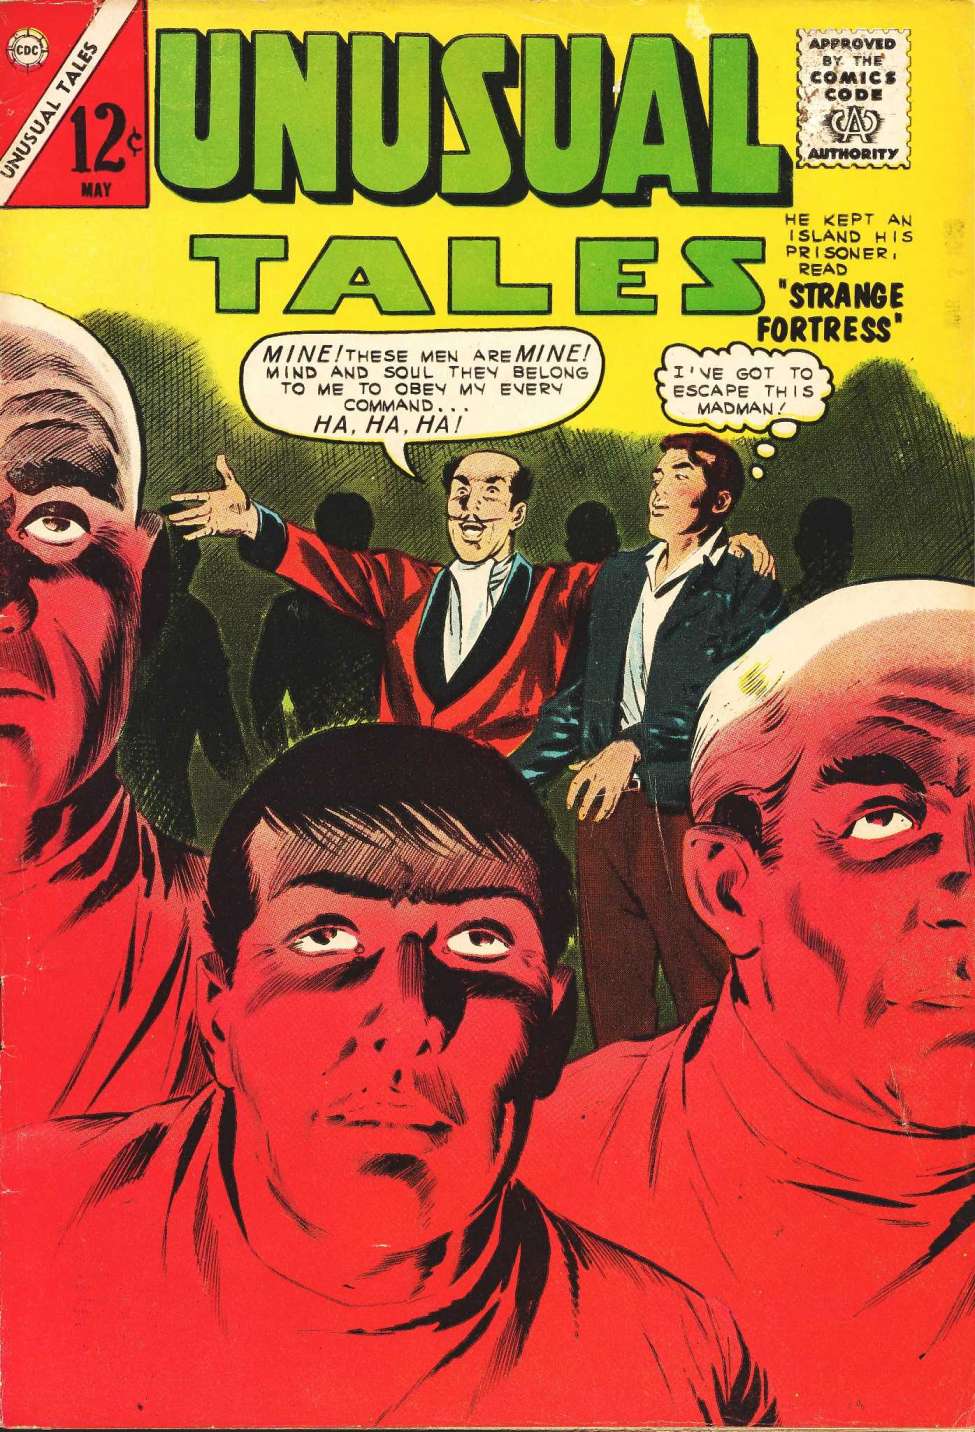 Book Cover For Unusual Tales 39 - Version 1